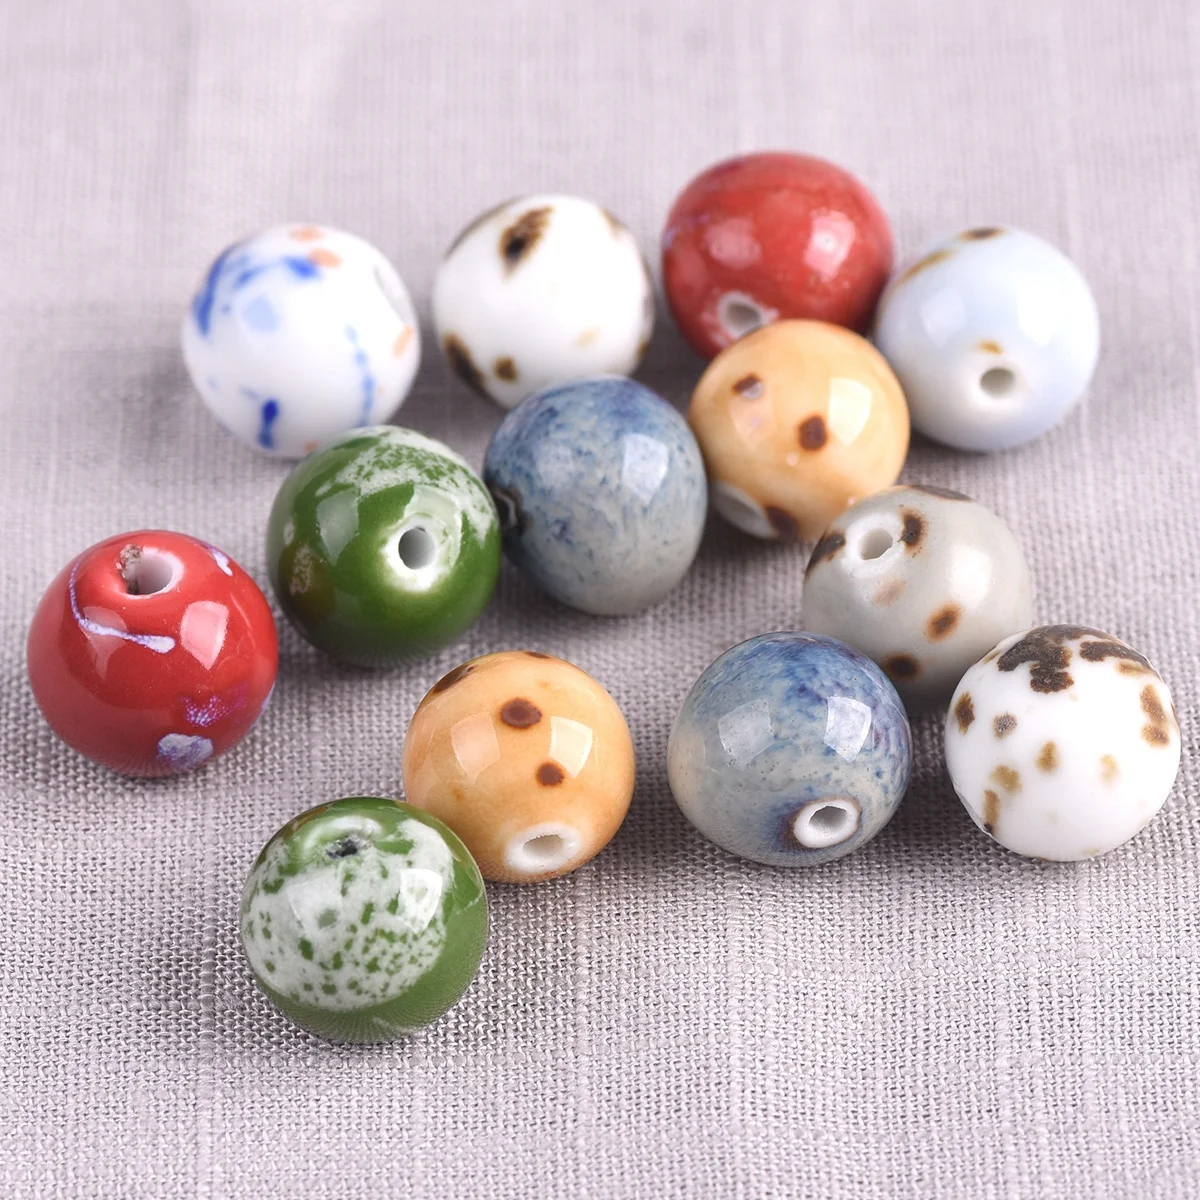 10pcs 14~15mm Random Mixed Round Ceramic Porcelain Handmade Loose Spacer Beads lot for DIY Crafts Jewelry Making 10pcs flat round 15mm handmade ceramic porcelain loose spacer beads lot for jewelry making diy crafts findings